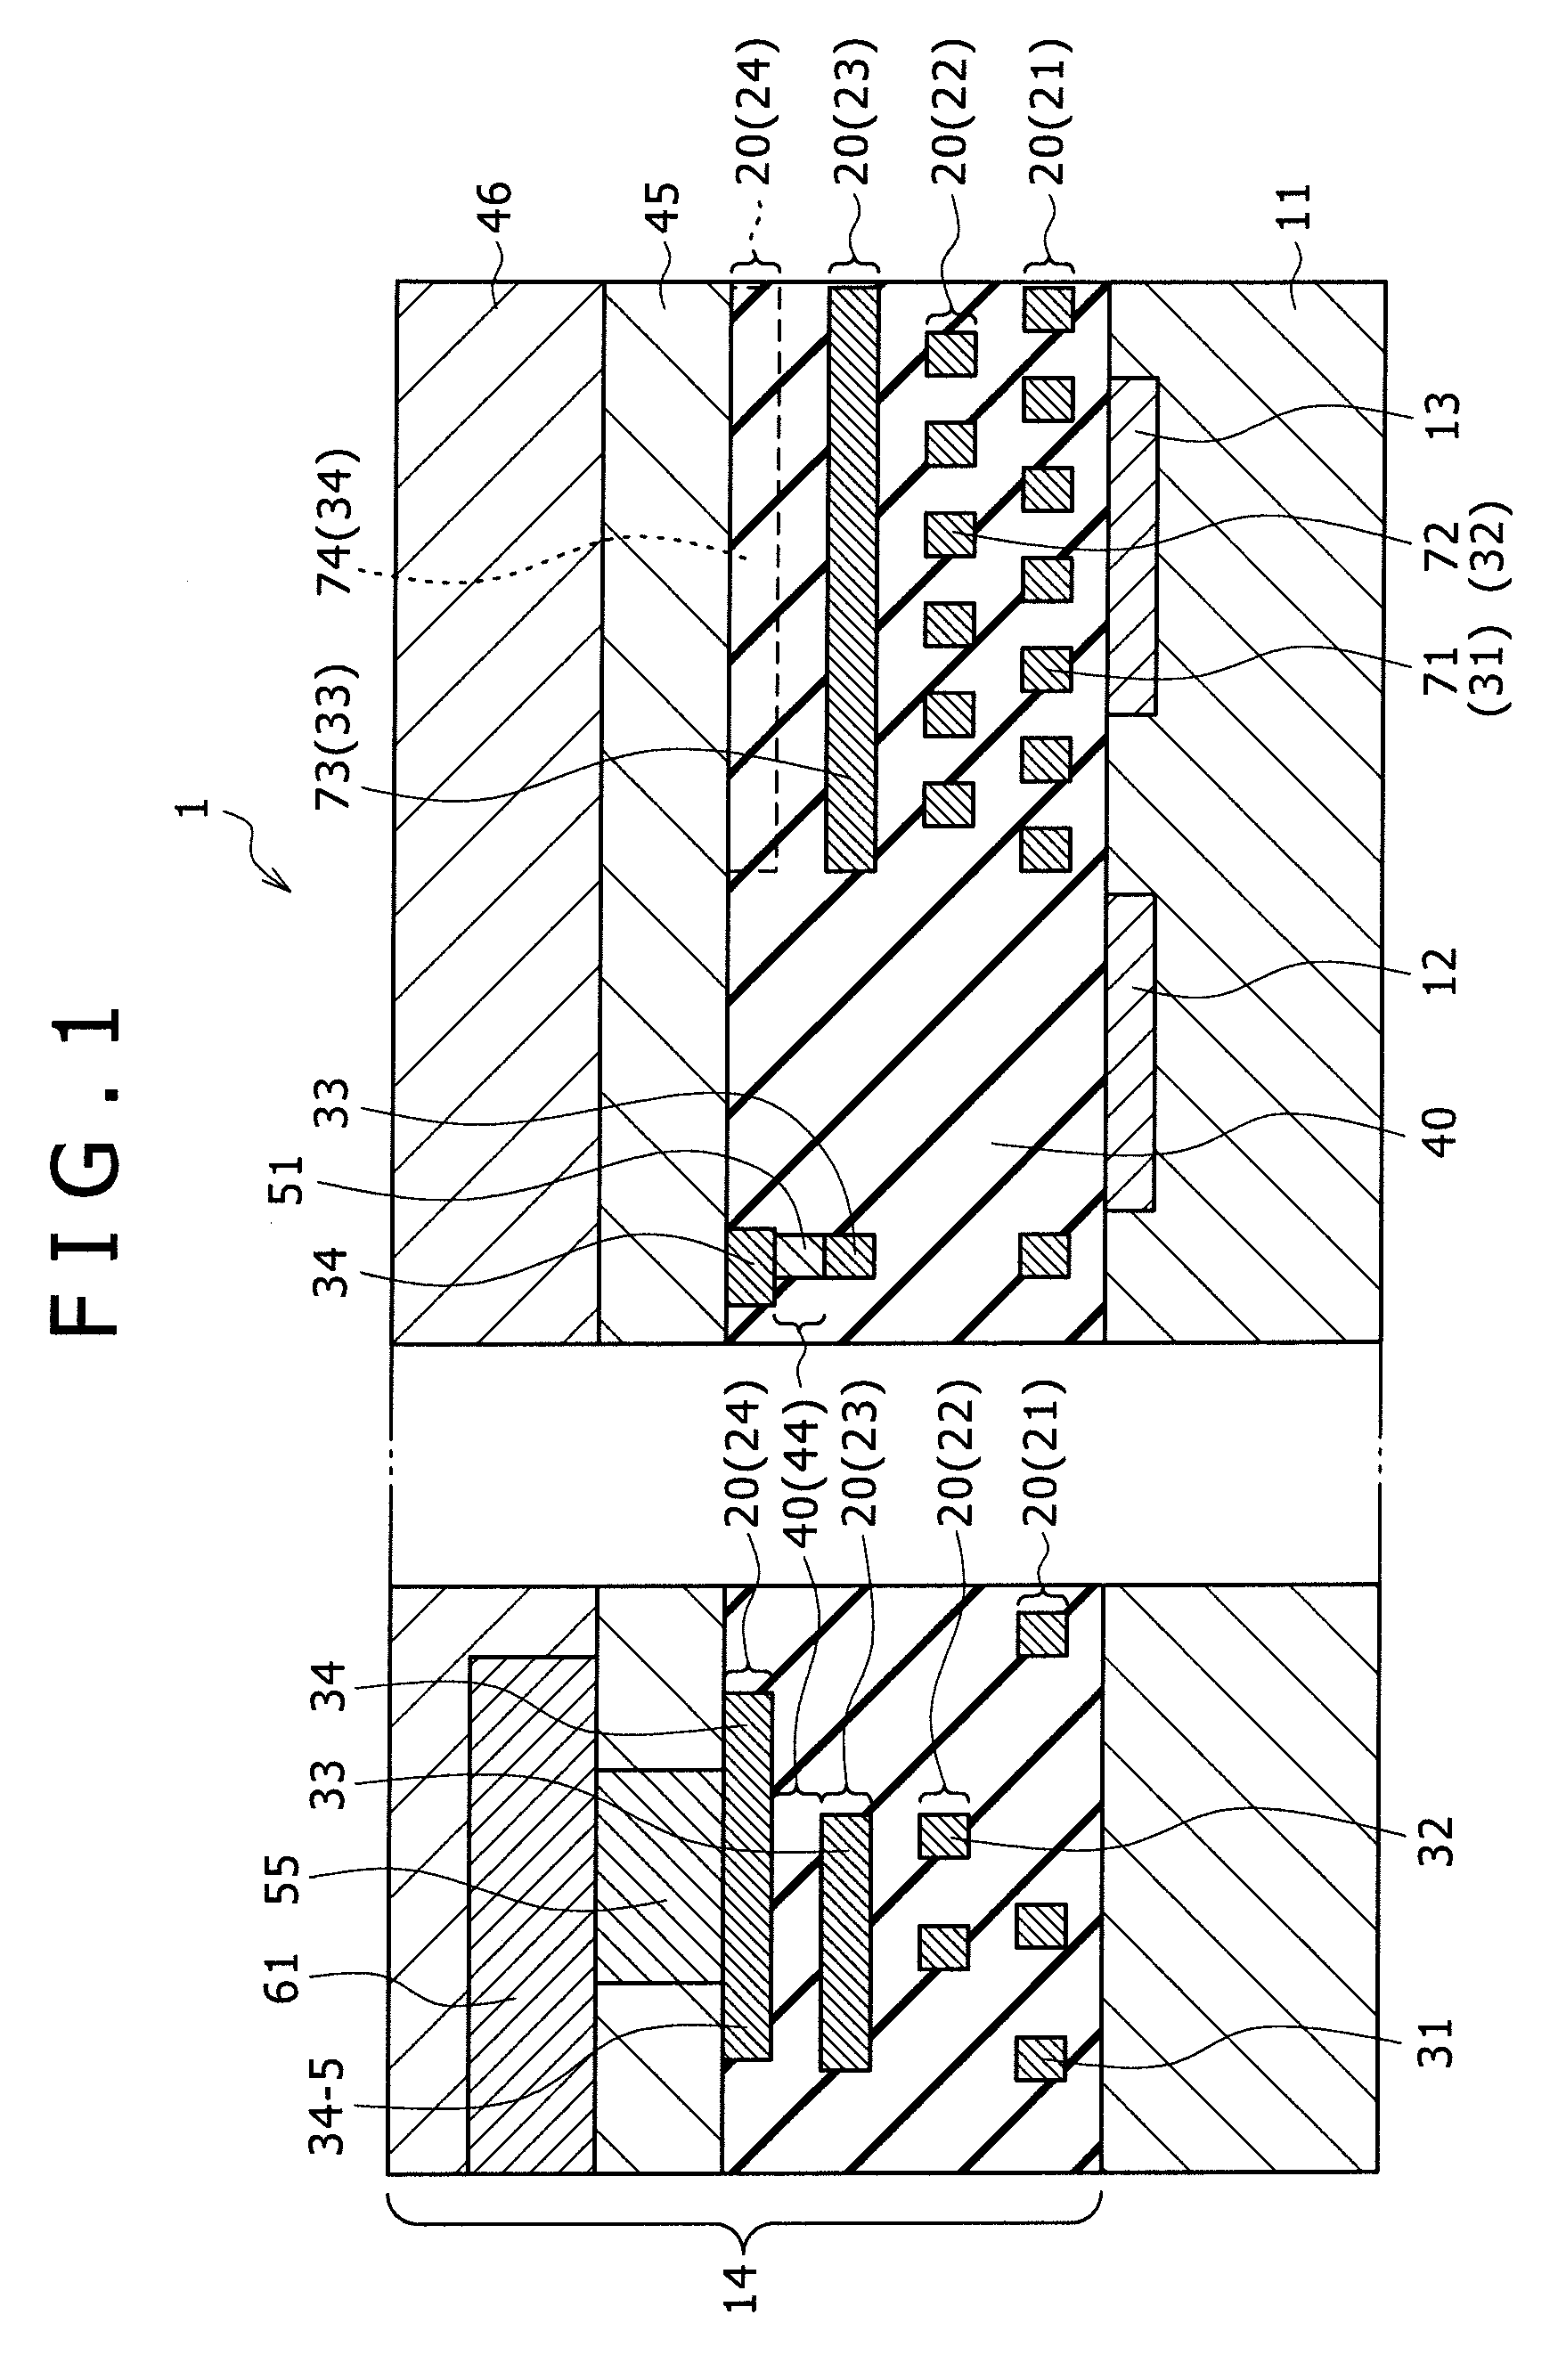 Solid-state image pickup device and fabrication method therefor